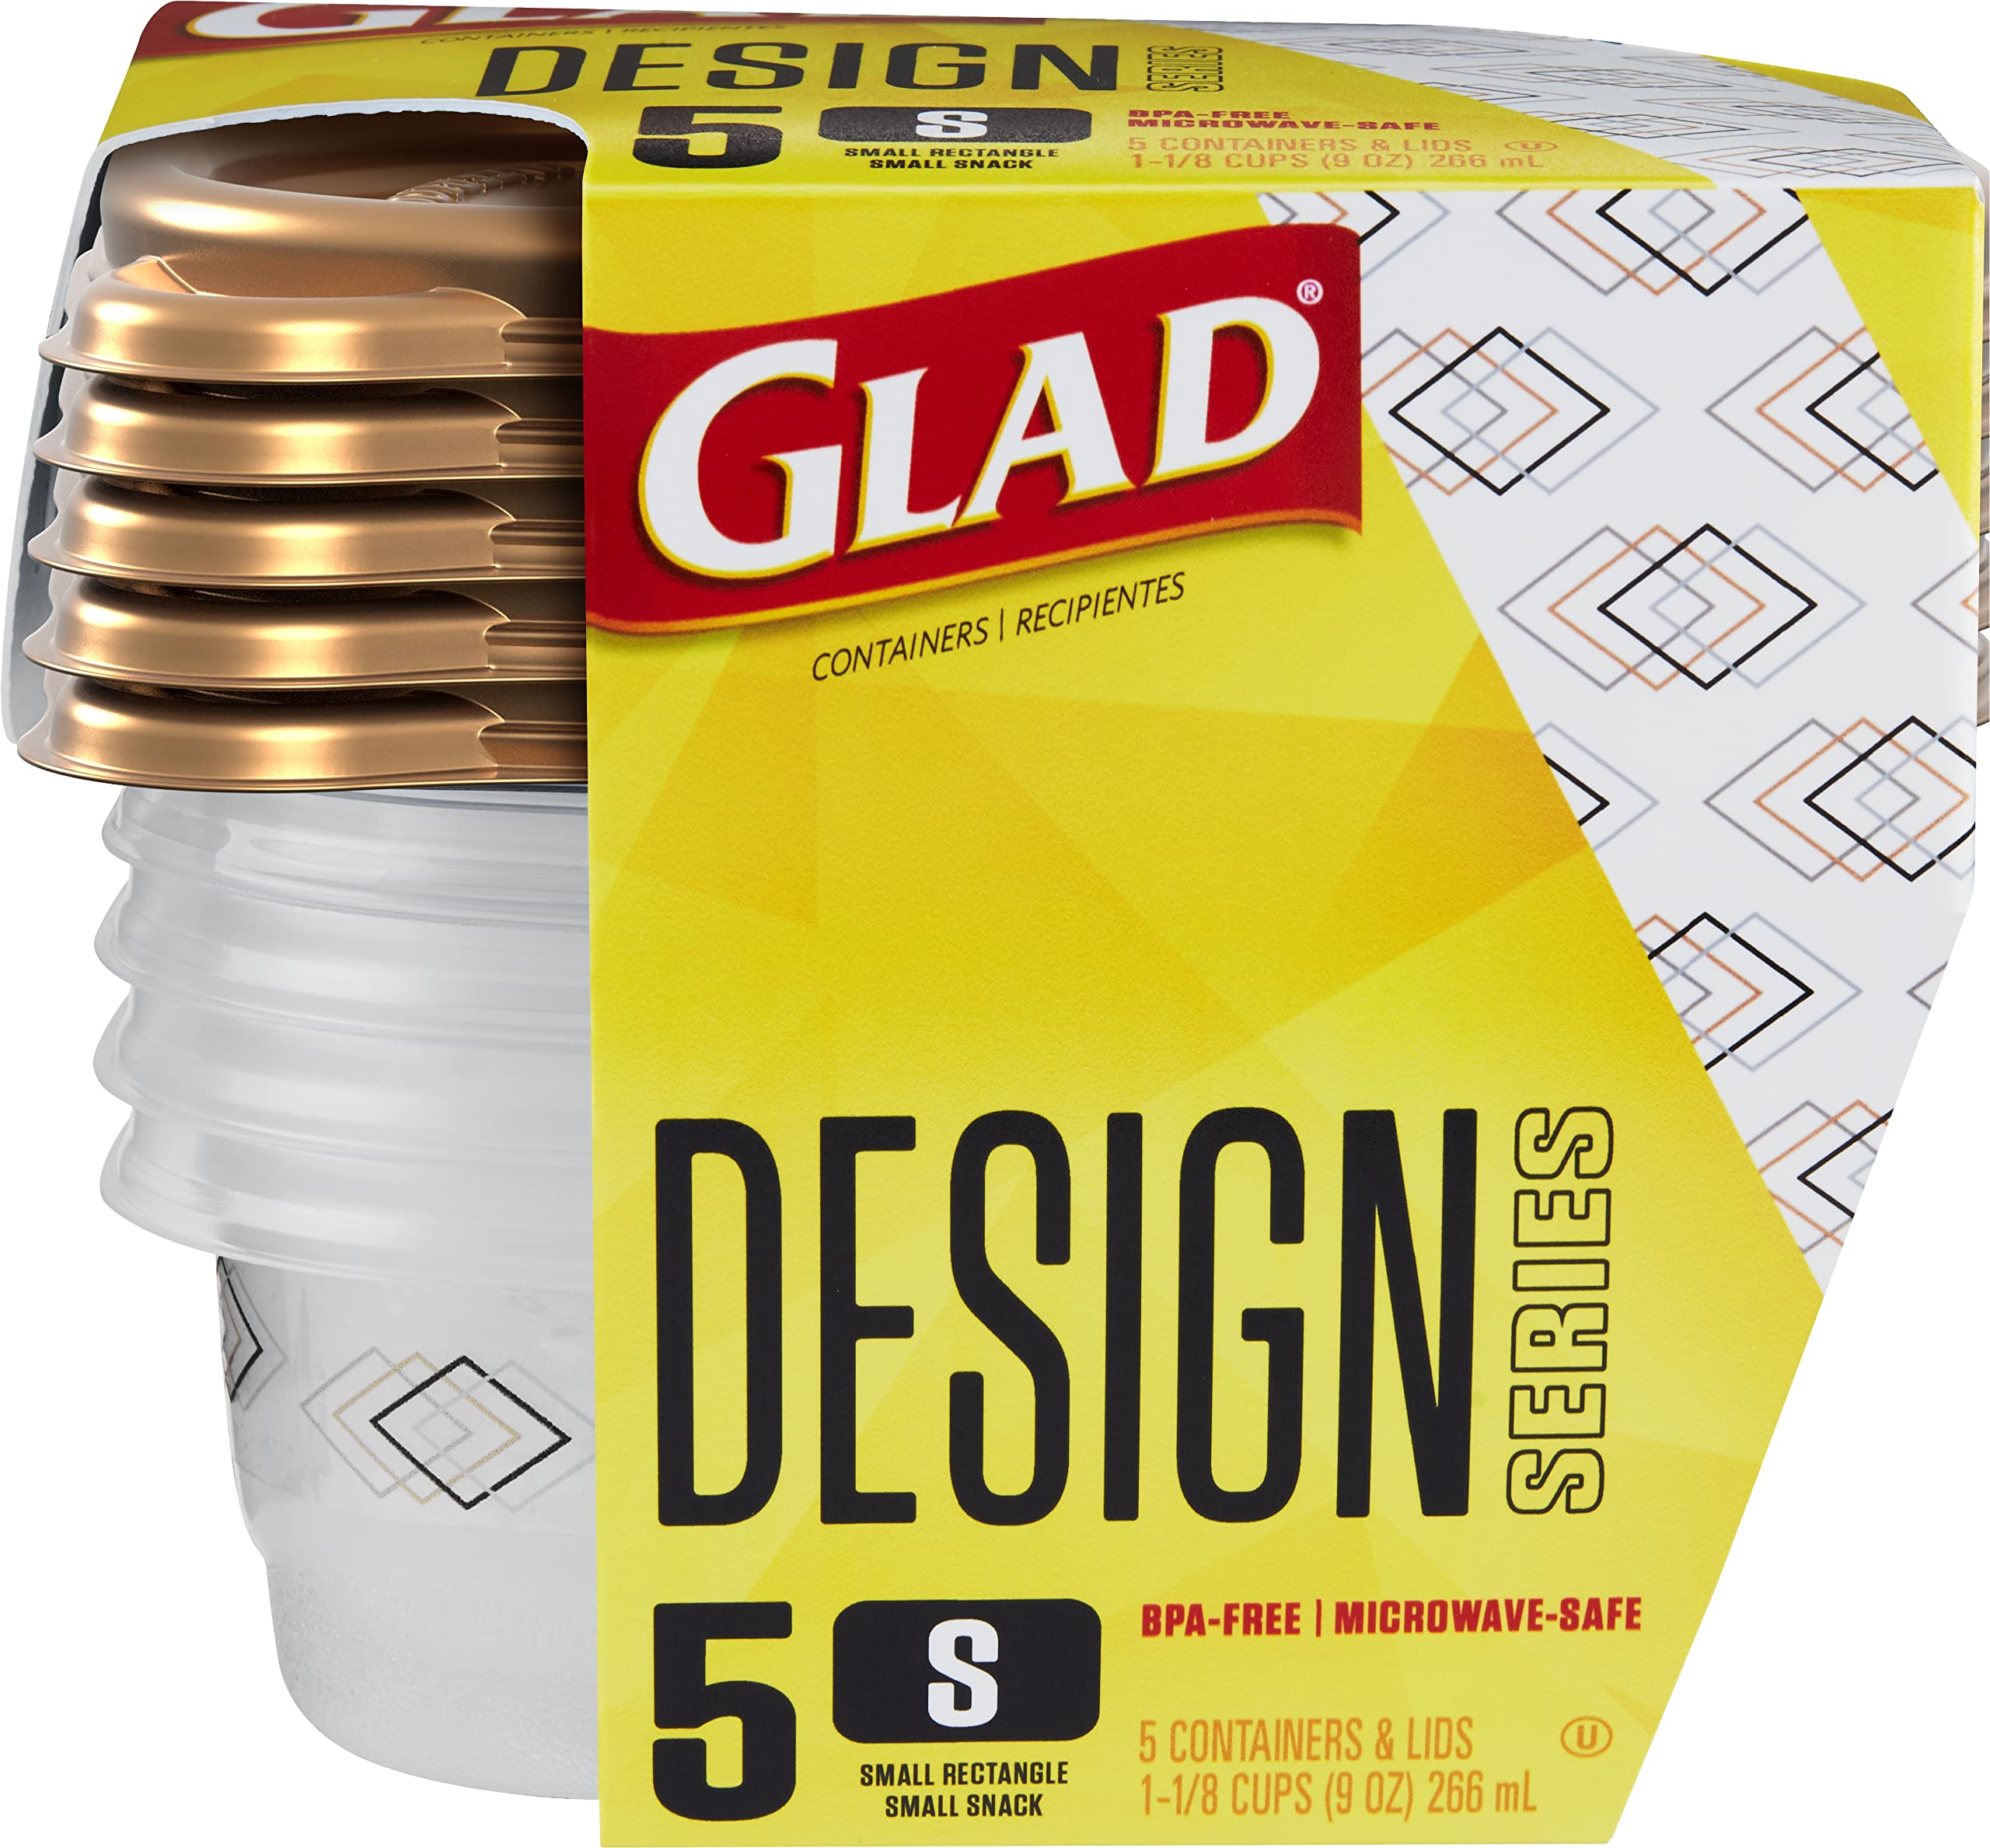 Glad Home Collection Containers & Lids, Small Snack, Square, 9 Ounce, Plastic Bags